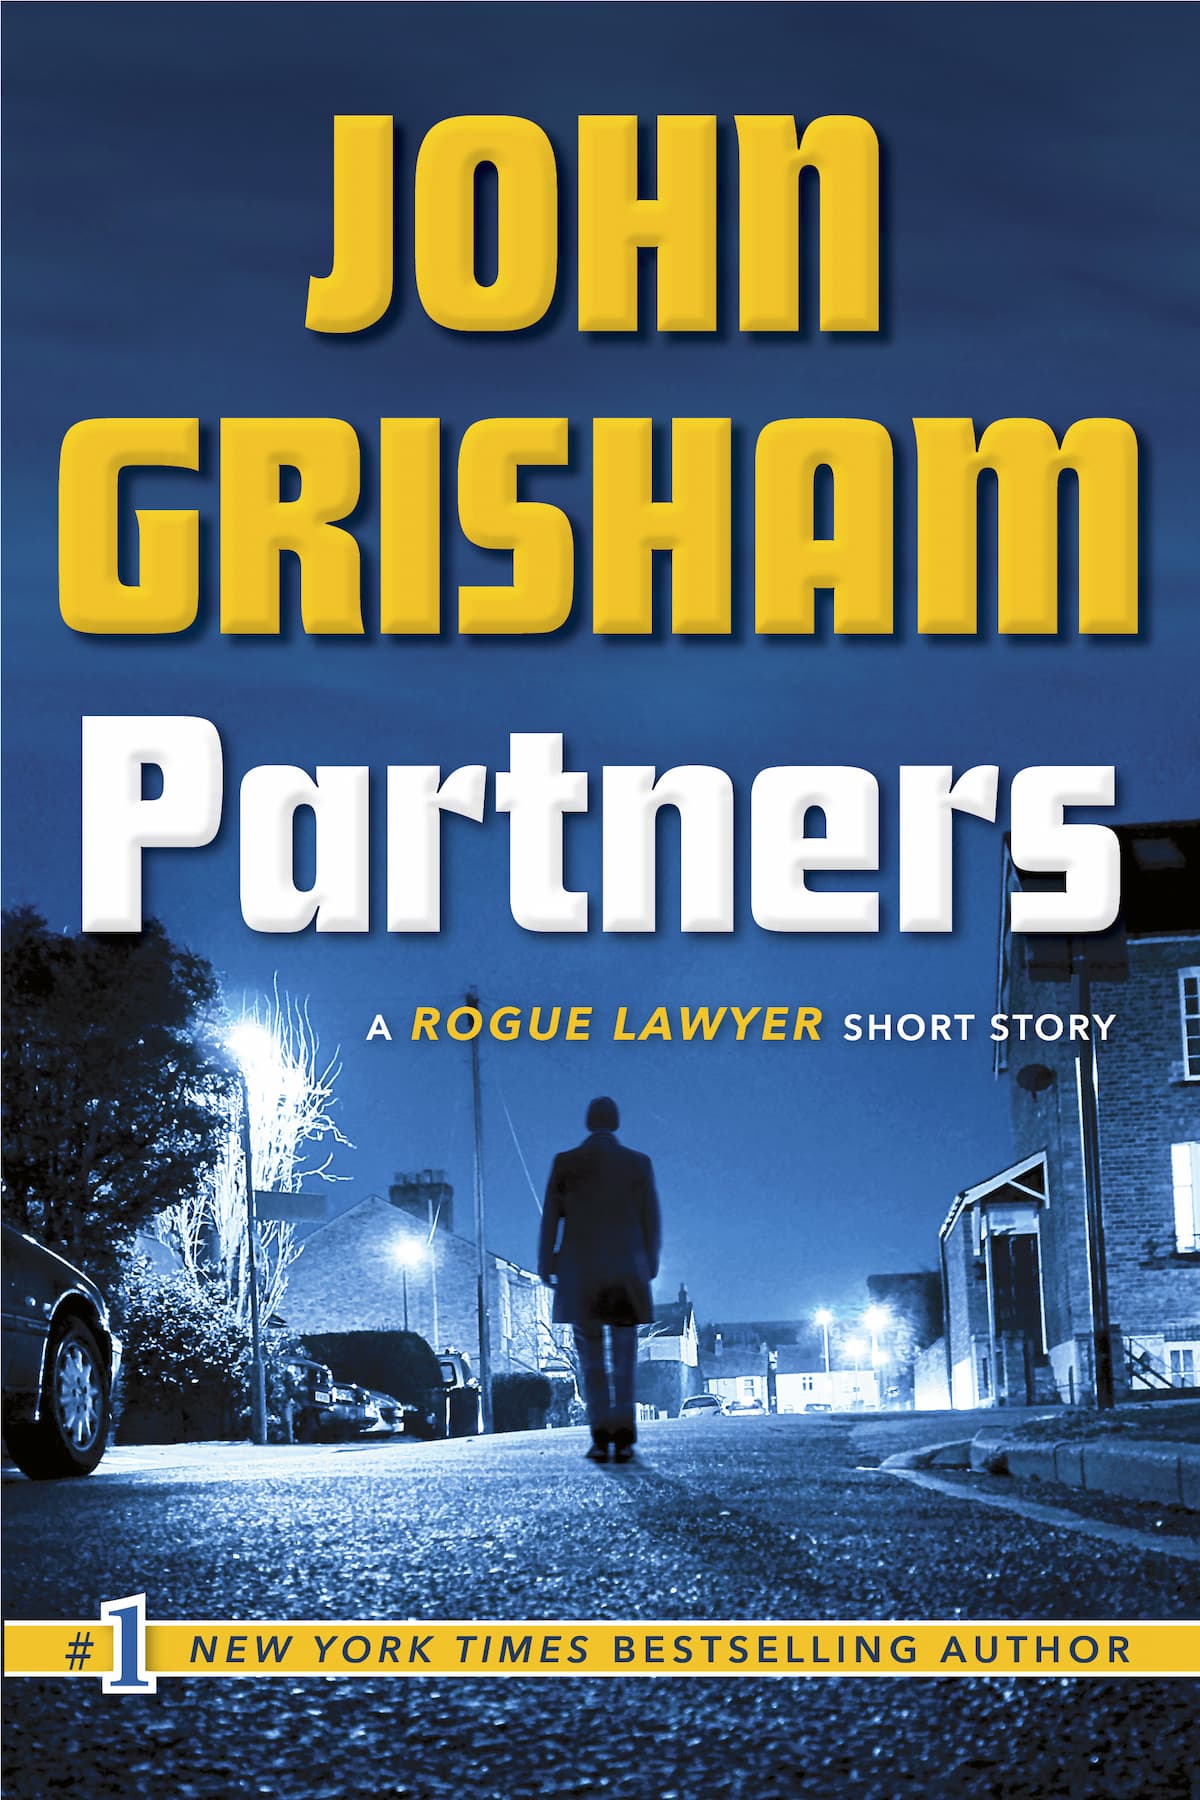 Partners - John Grisham (Rogue Lawyer Series Book 2) can be a great help to those who seek to recharge their energy levels during the holidays.